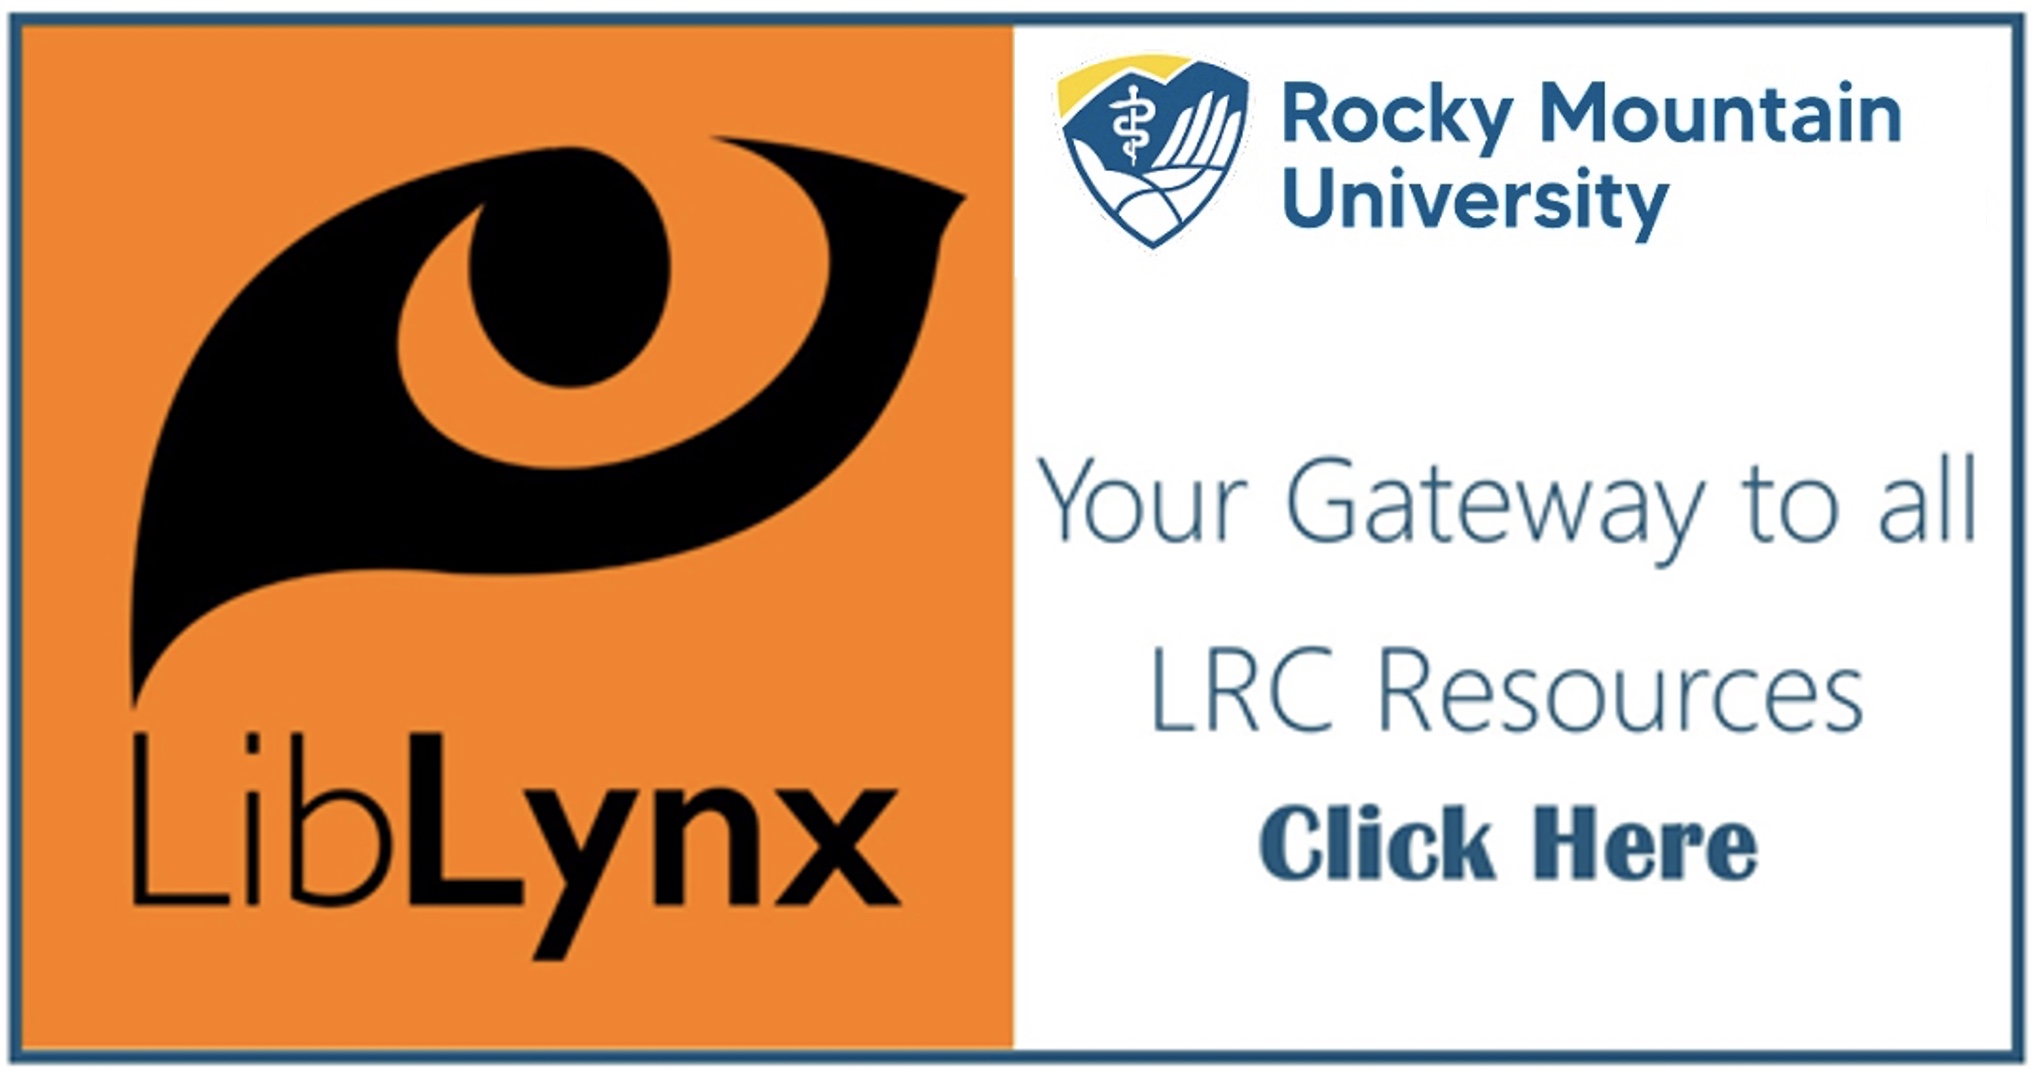 RMUoHP LibLynx Your Gateway to all LRC Resources Click Here image